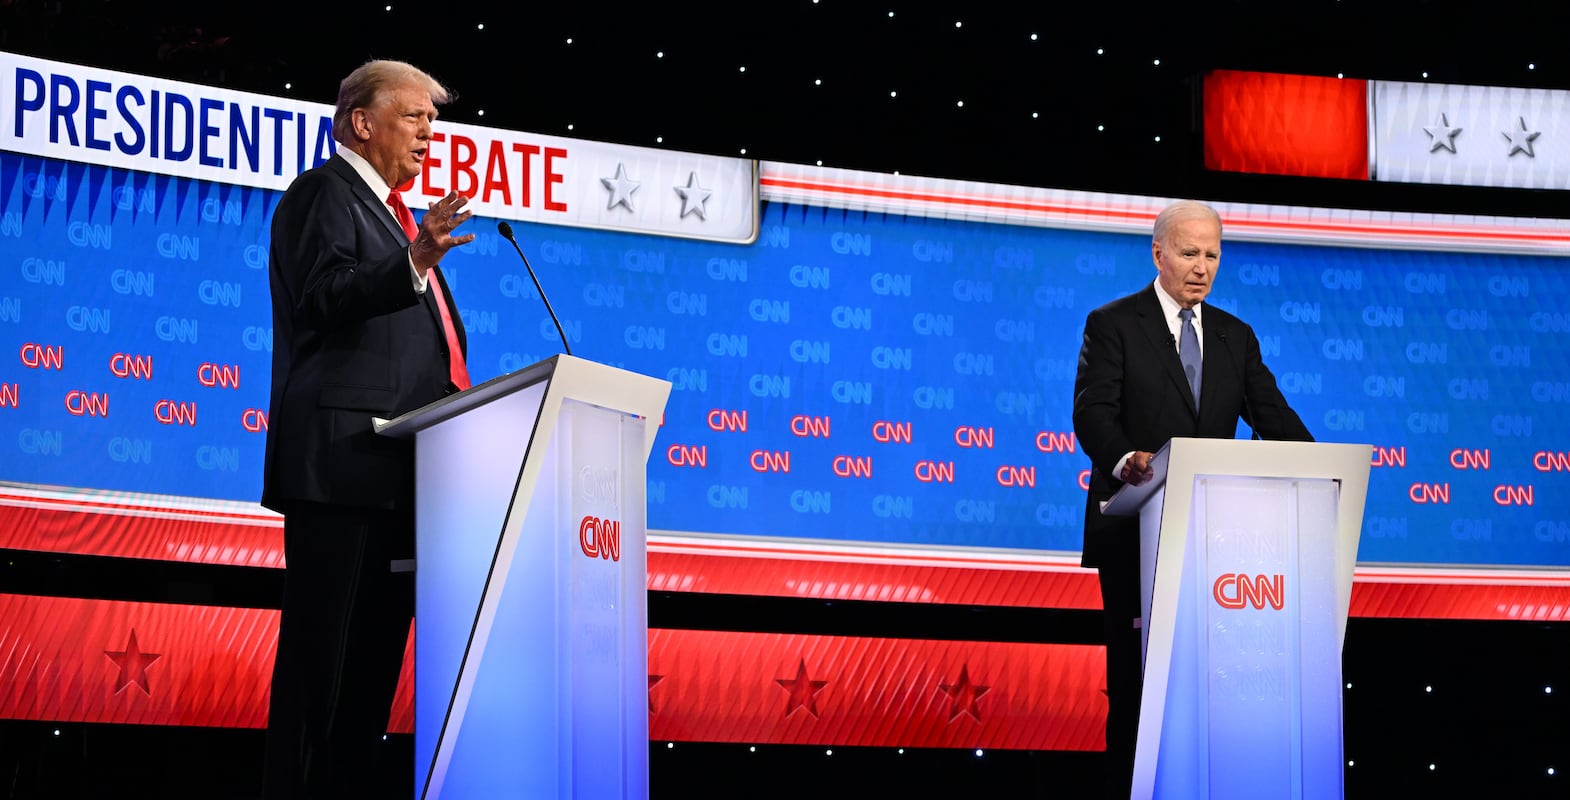 US President Joe Biden (R) and former US President Donald J.  Trump (L) participate in the first 2024 presidential election debate, at Georgia Institute of Technologyâ€™s McCamish Pavilion in Atlanta, Georgia, USA, 27 June 2024.  The first 2024 presidential election debate is hosted by CNN.   EPA / WILL LANZONI  /  CNN PHOTOS MANDATORY CREDIT: CNN PHOTOS  /  CREDIT CNN - WILL LANZONI   EDITORIAL USE ONLY  EDITORIAL USE ONLY